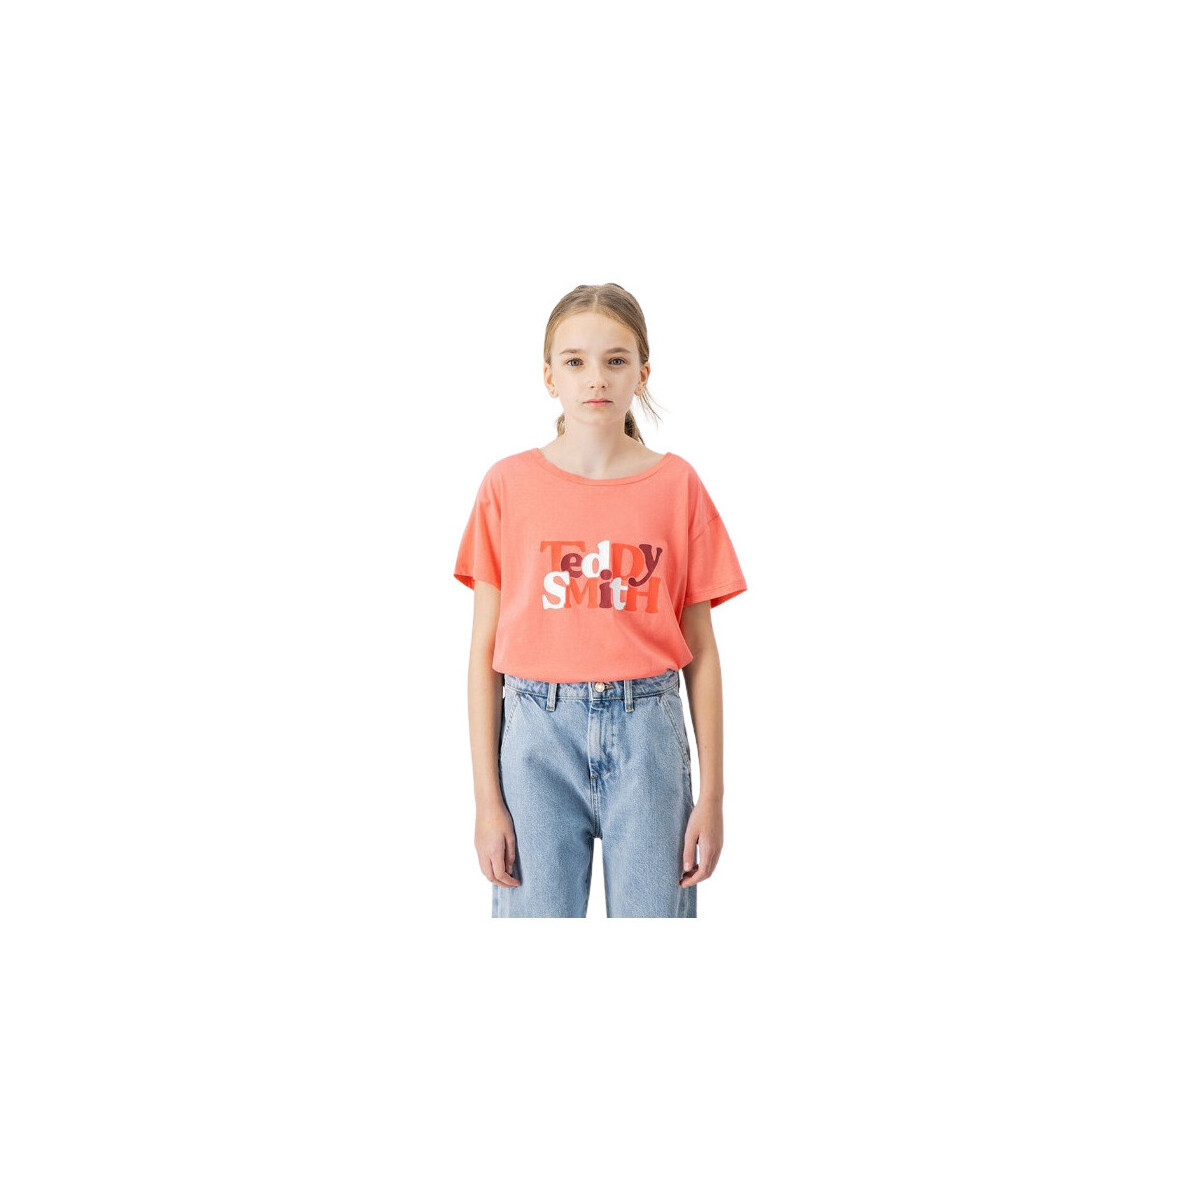 Teddy Smith Multicolore TEE-SHIRT T-YOUPY JUNIOR - PINK COCKTAIL - 10 ans YuWJT8gy